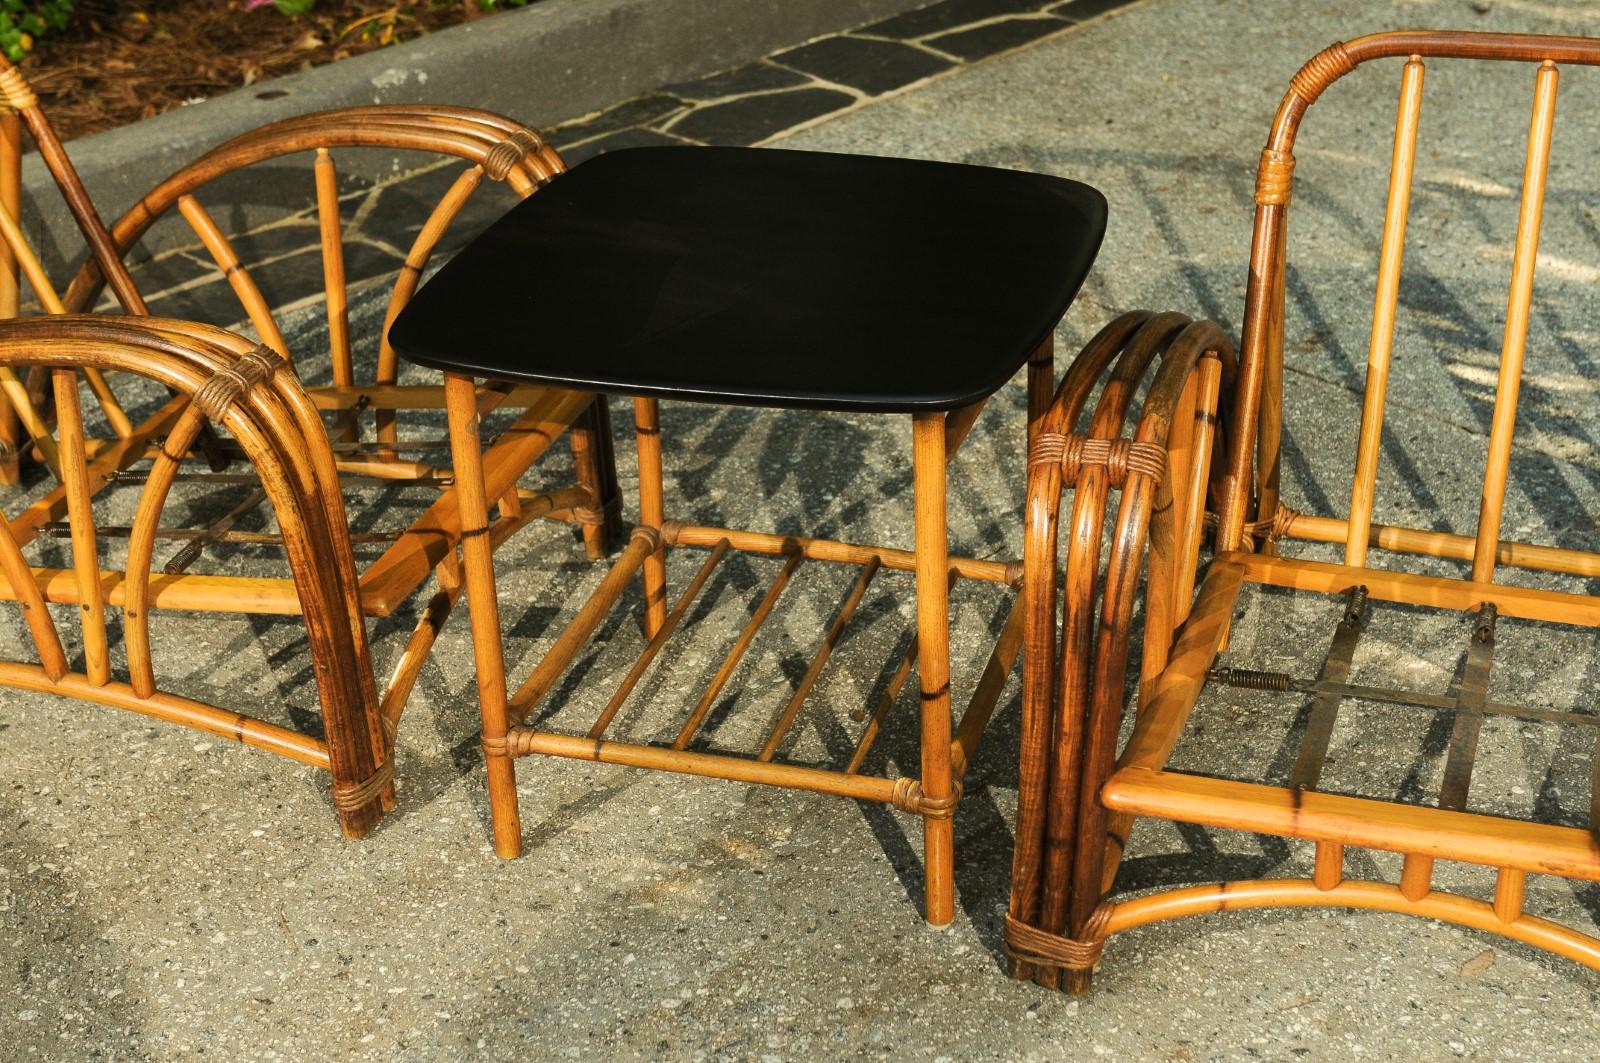 Extraordinary Restored Art Deco Seating Set by Heywood-Wakefield, circa 1935 For Sale 2